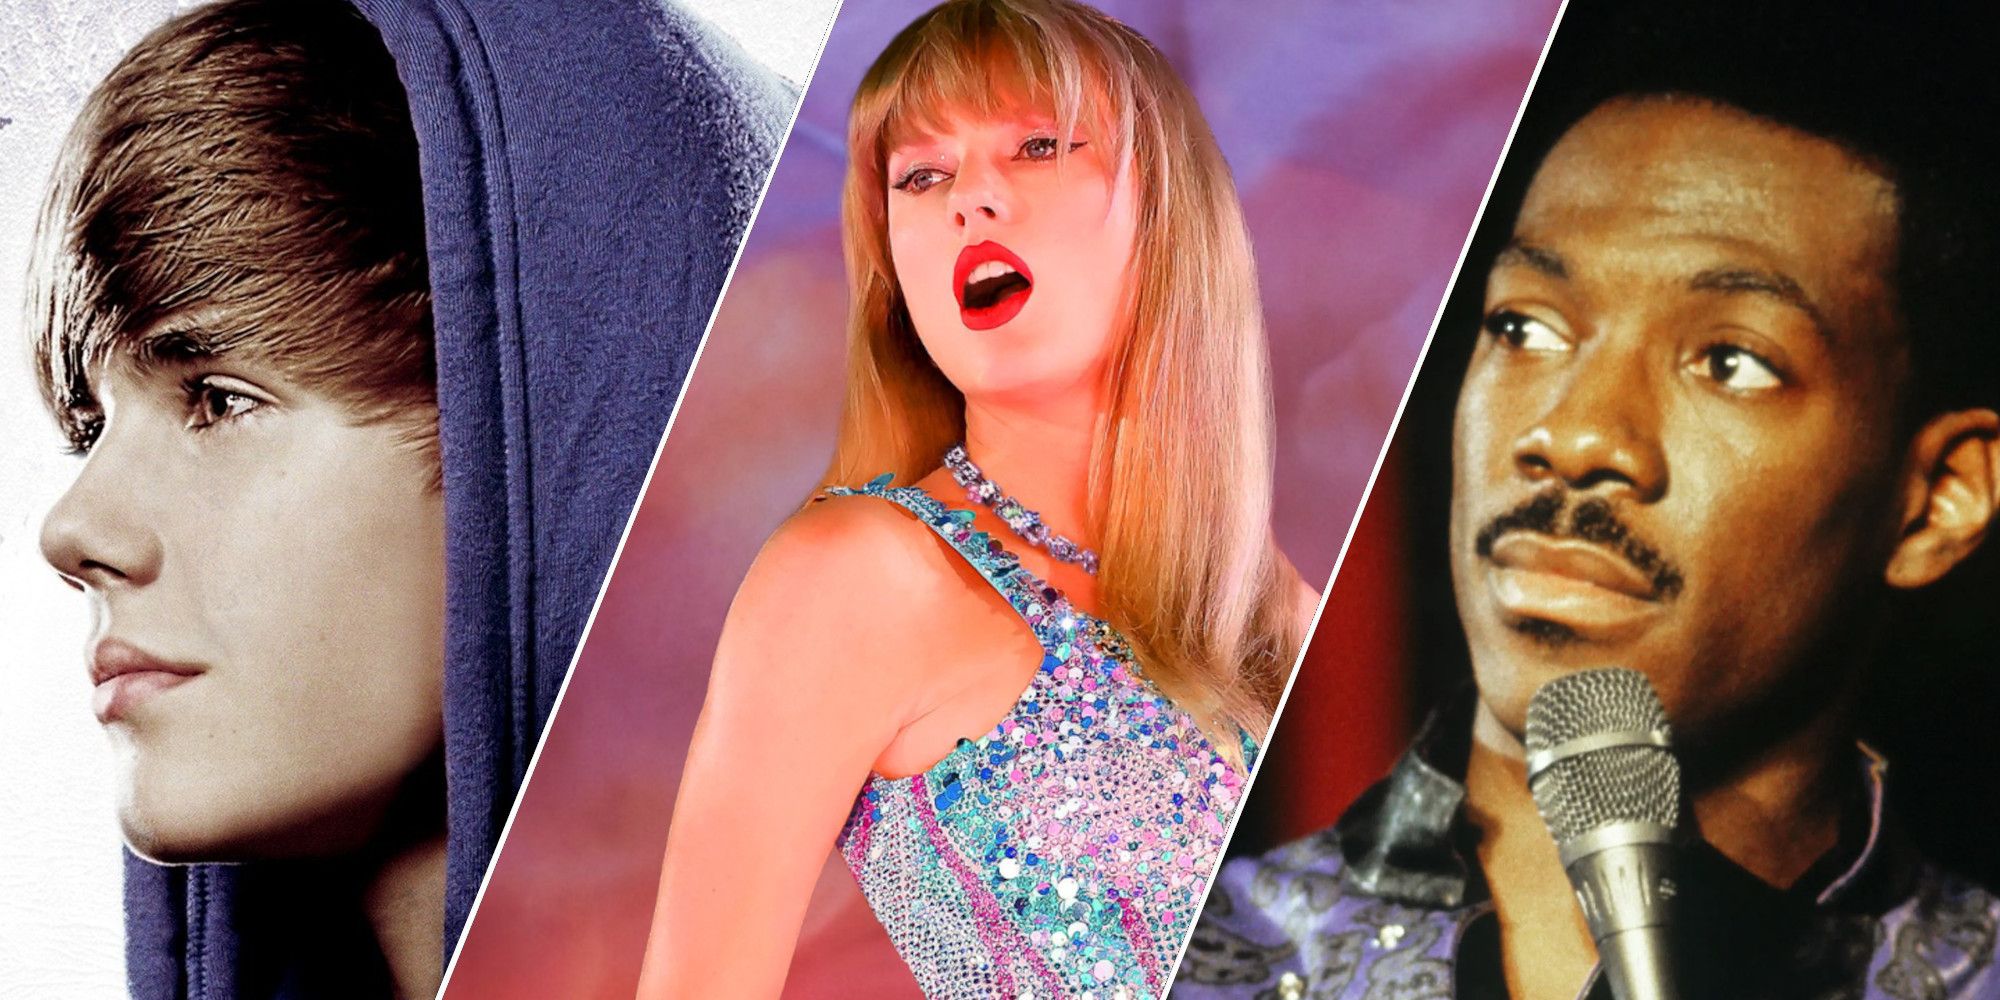 A collage of the highest grossing concert movies of all time, featuring stills from Justin Bieber: Never Say Never, Taylor Swift: The Eras Tour, and Eddie Murphy Raw